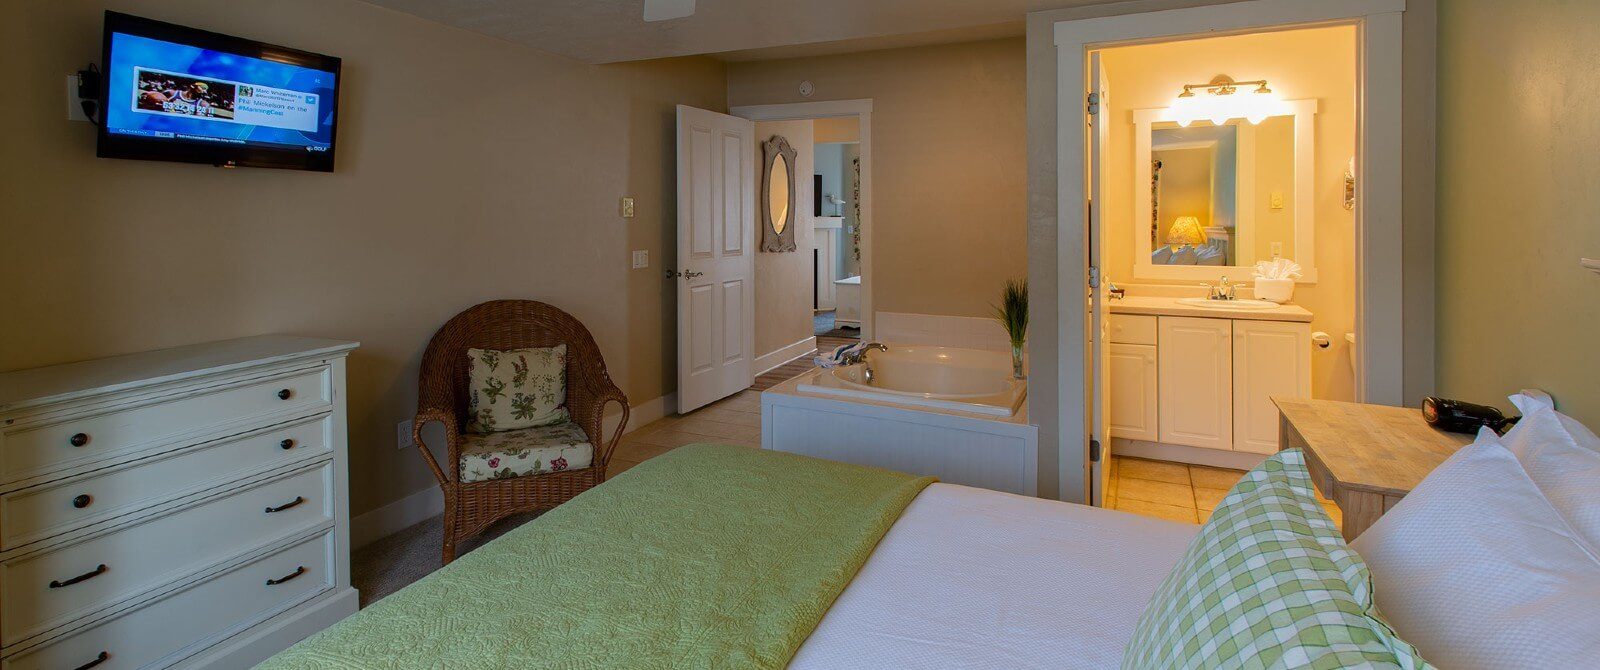 Bedroom with white and green bed, dresser, TV, jacuzzi tub and doorway open to a bathroom